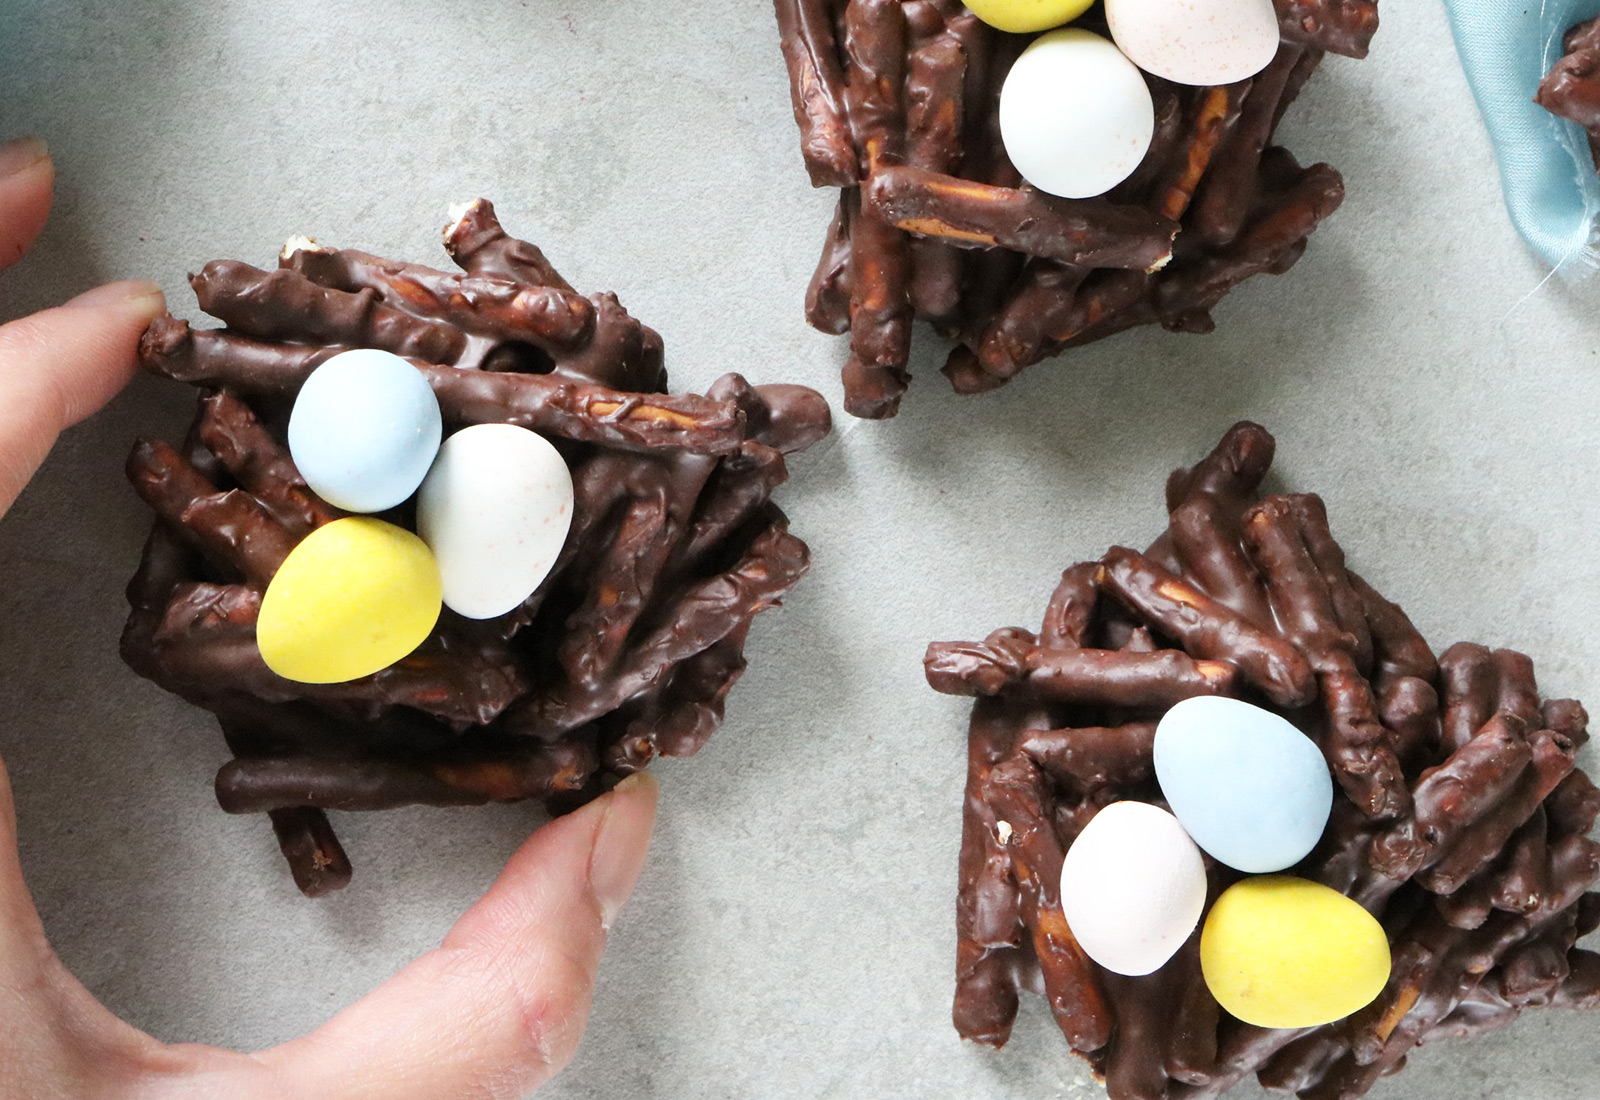 How to Make Bird's Nest Cookies for Easter